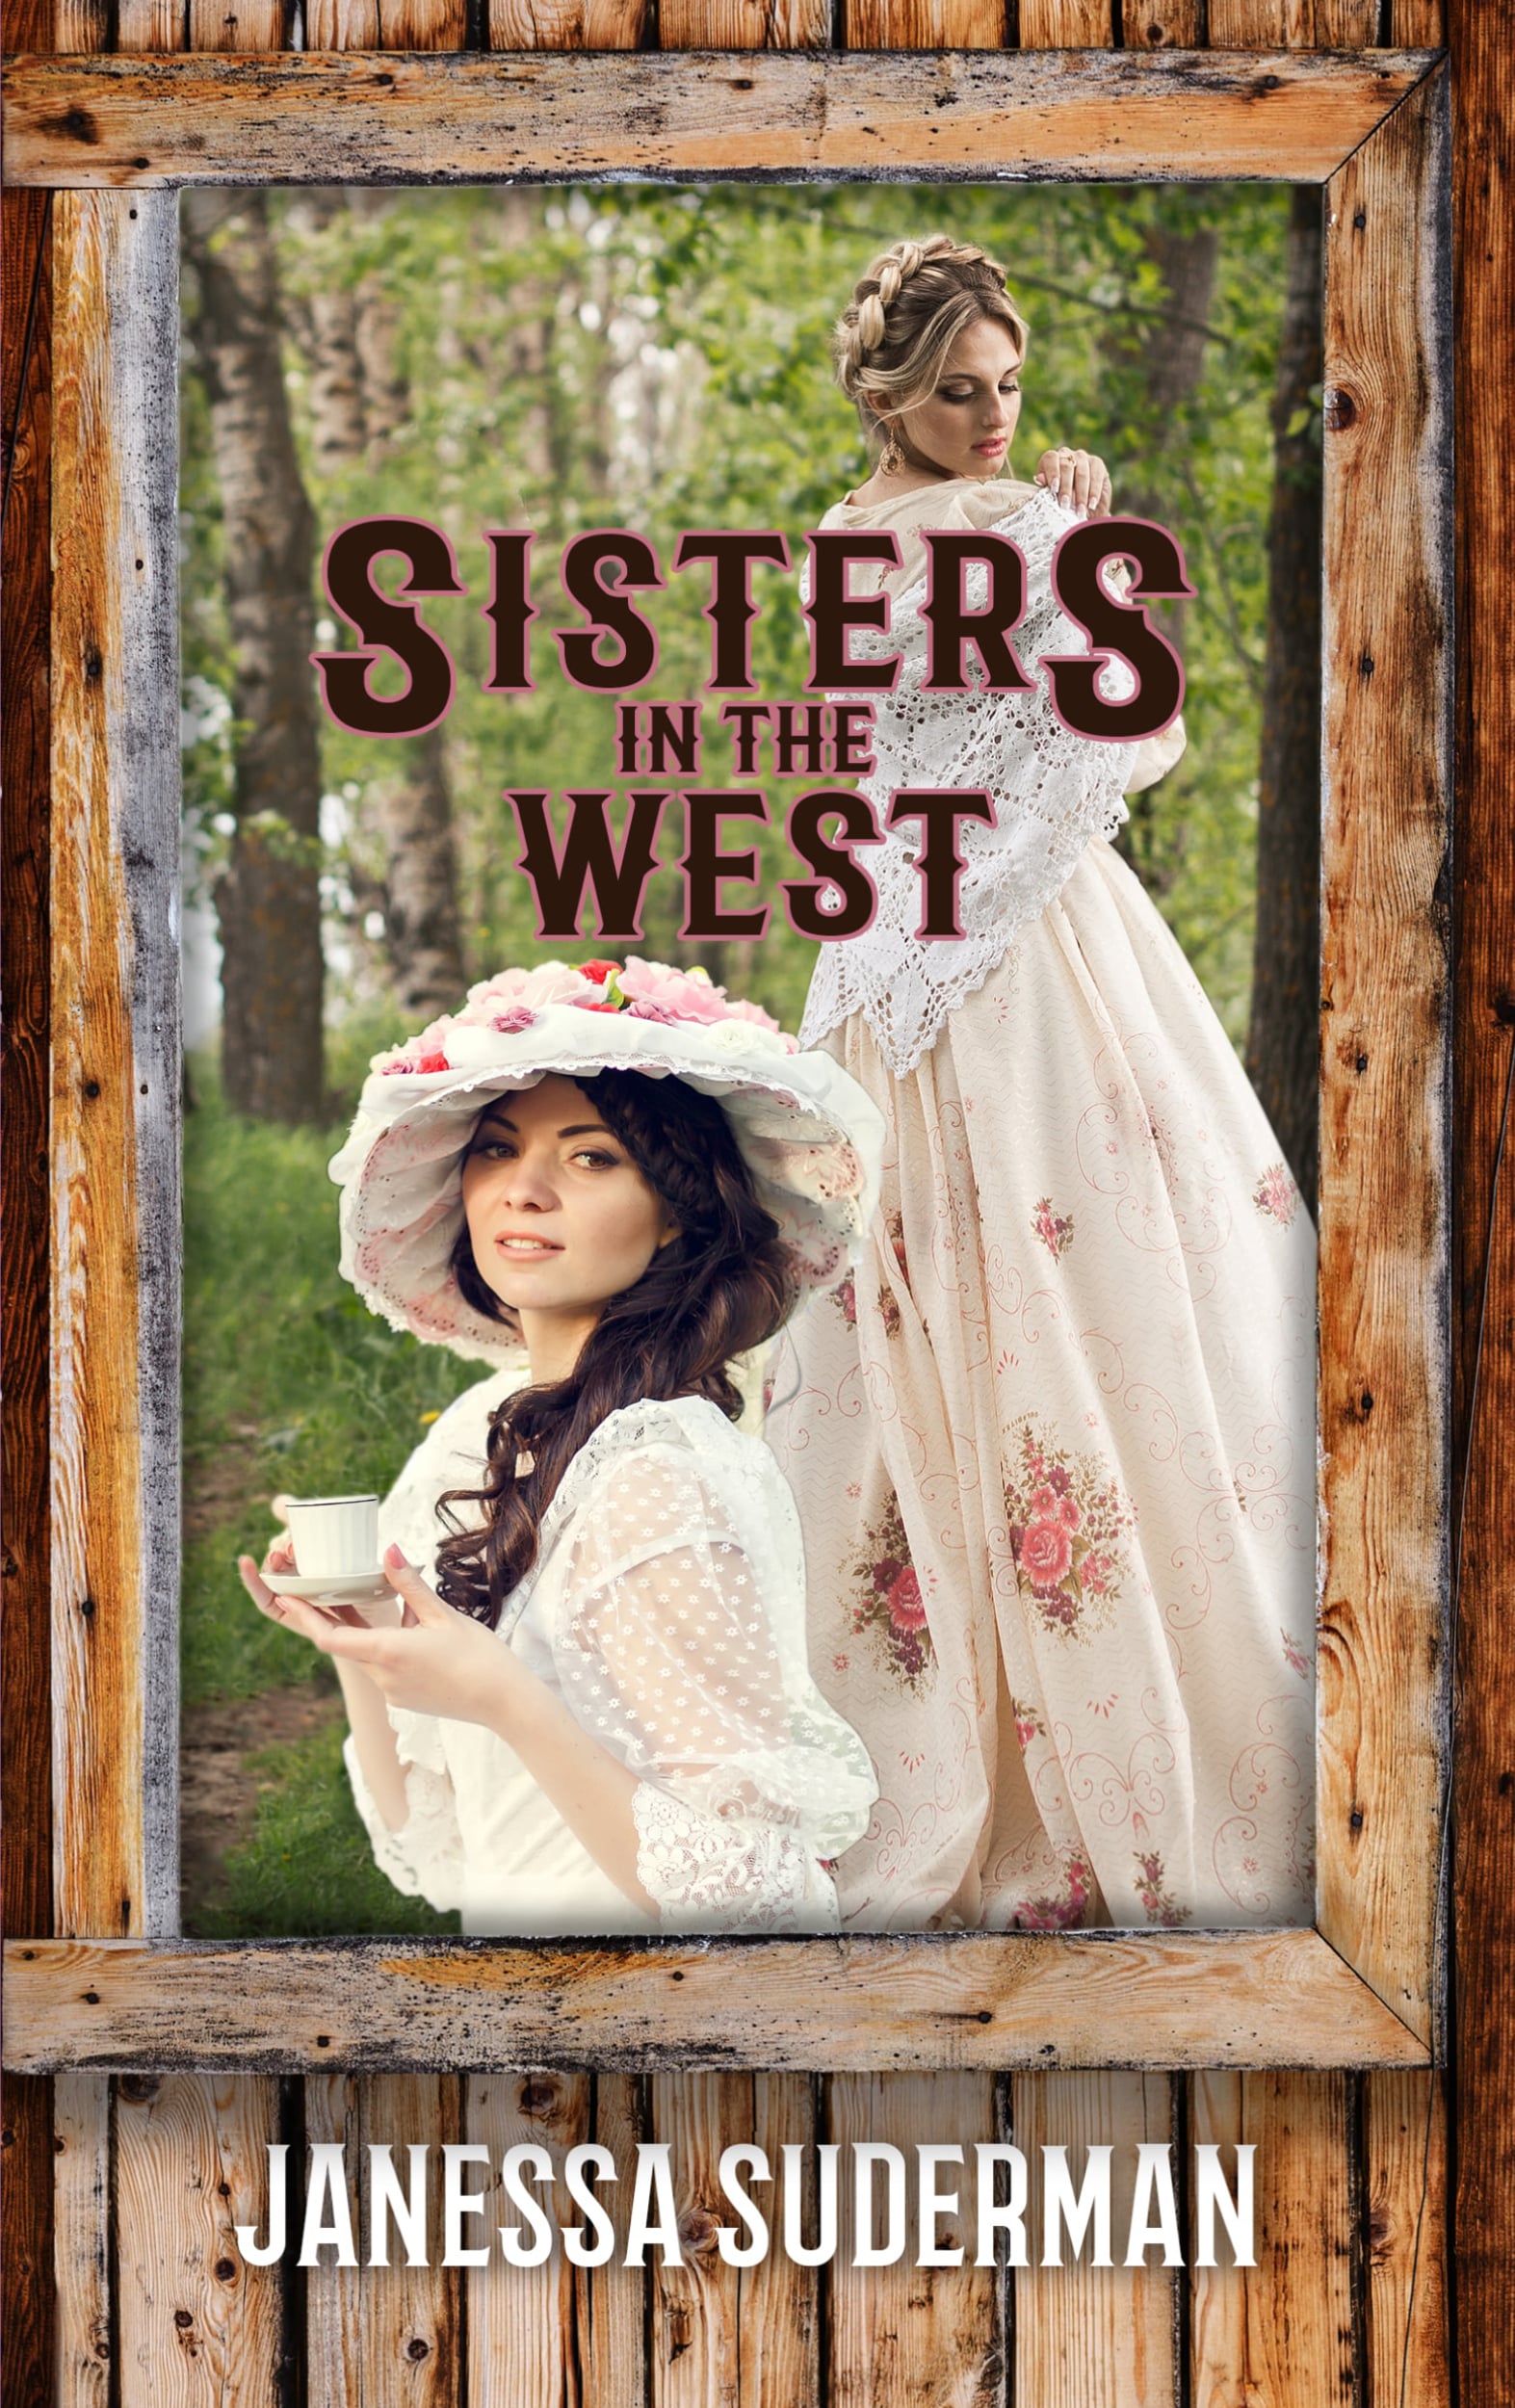 FREE: Sisters in the West by Janesa Suderman